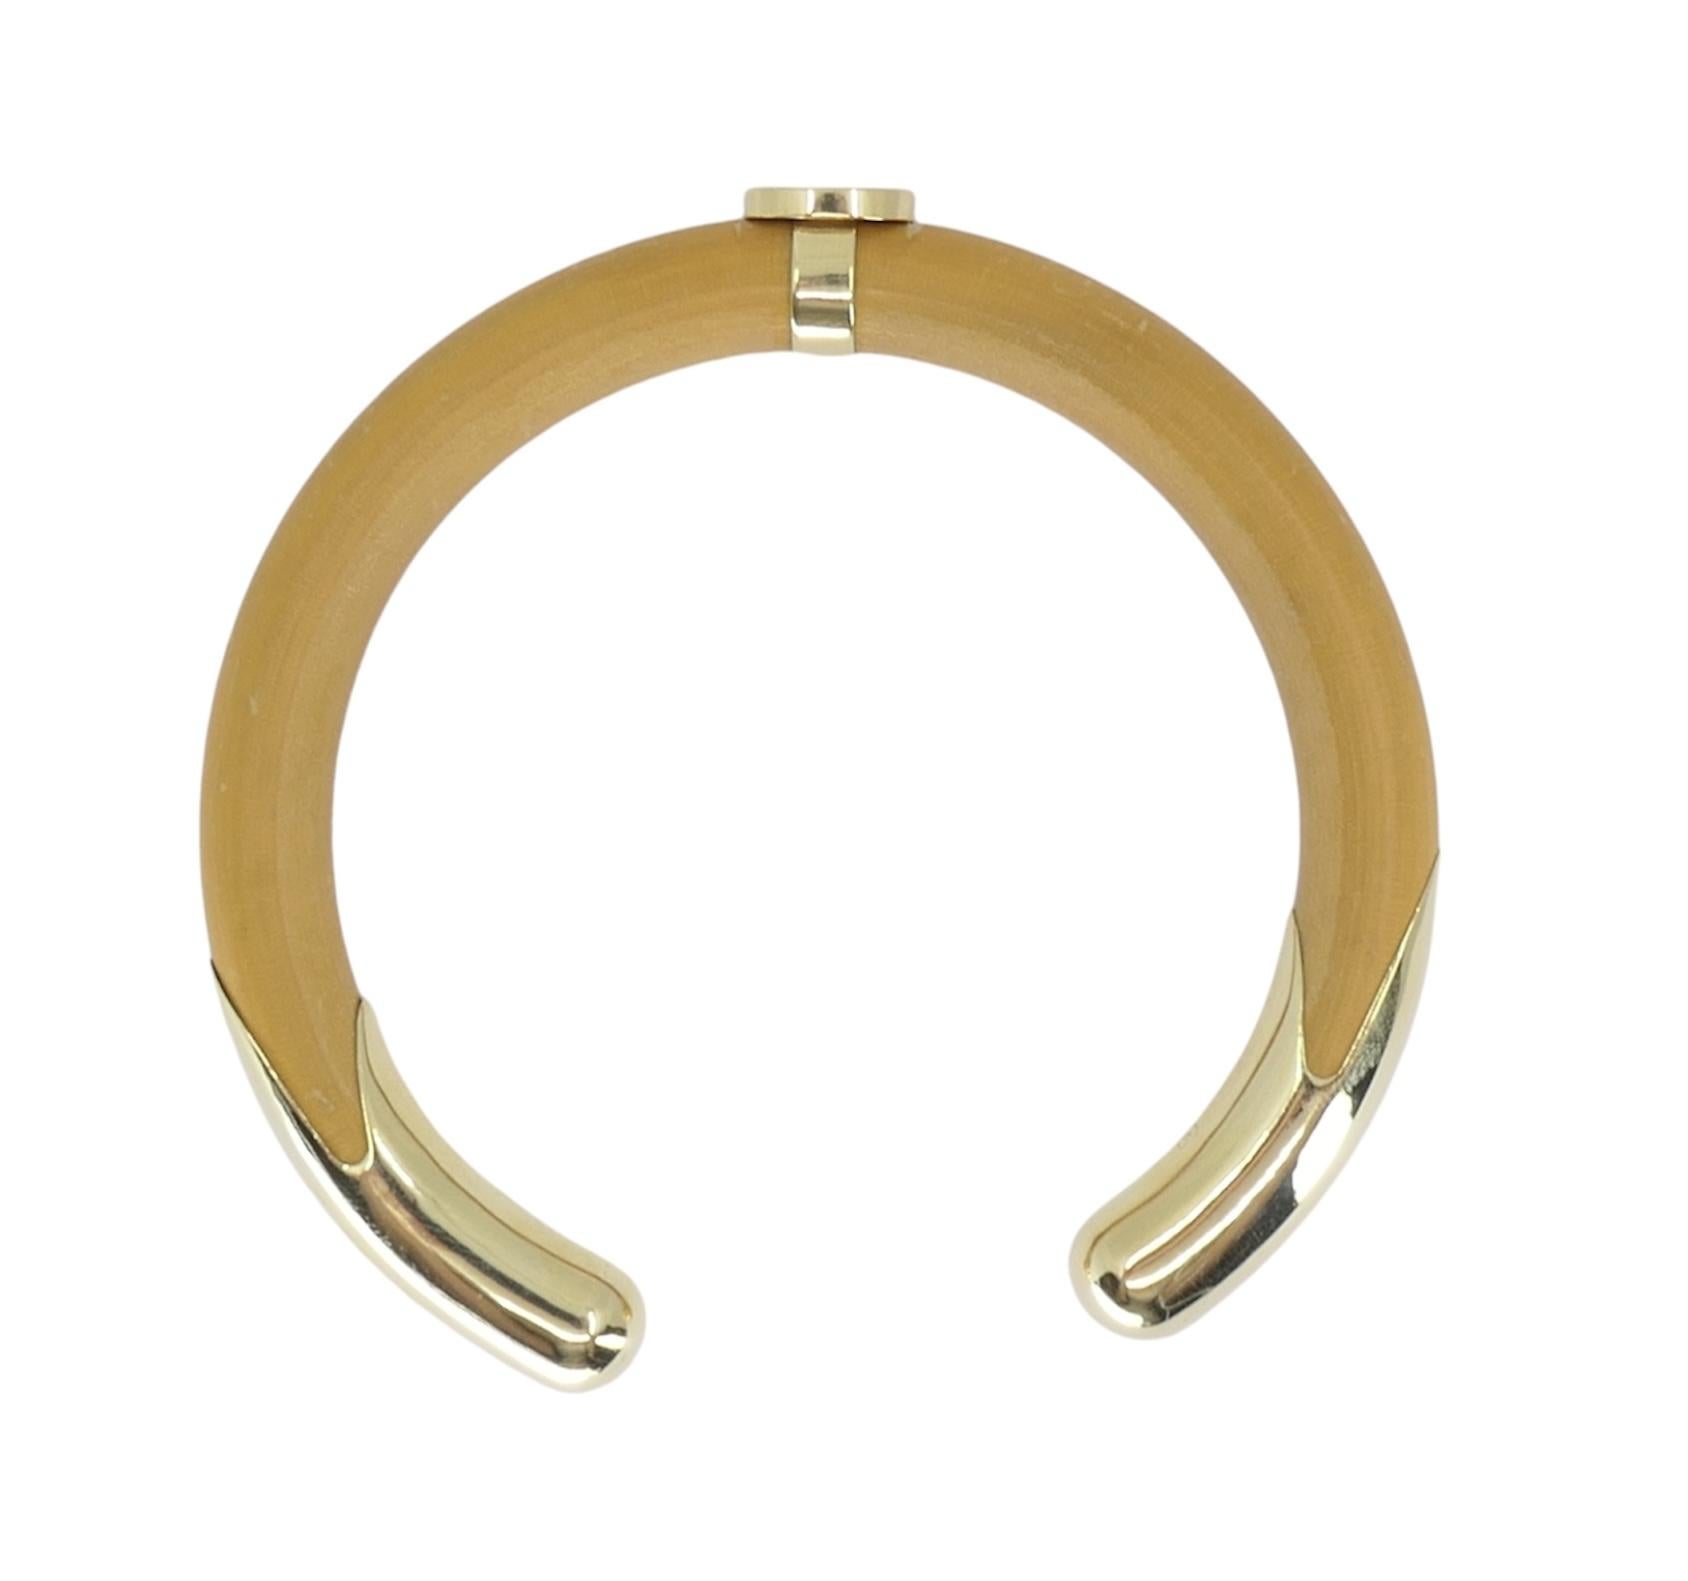 Vintage Elsa Peretti For Tiffany & Co. Bamboo 18k Gold Cuff Bracelet For Sale 2